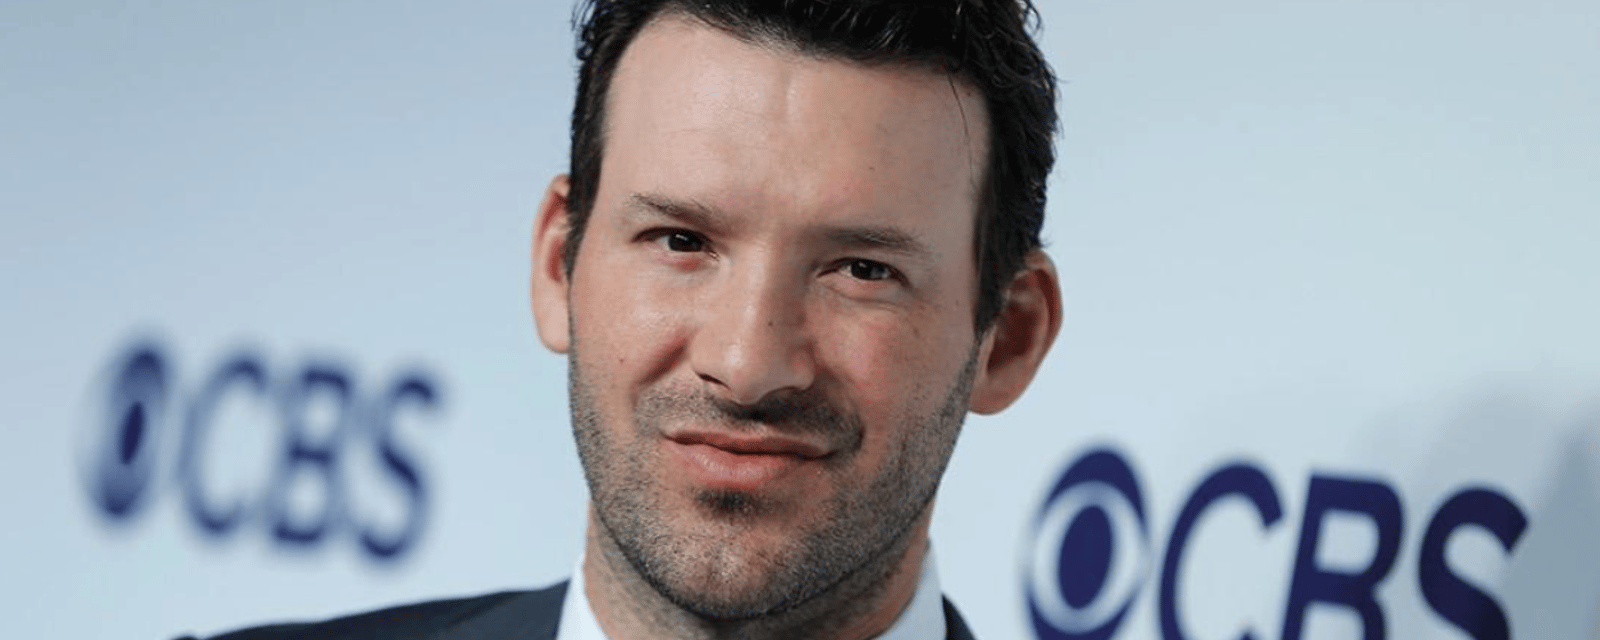 CBS staged “intervention” with Tony Romo 